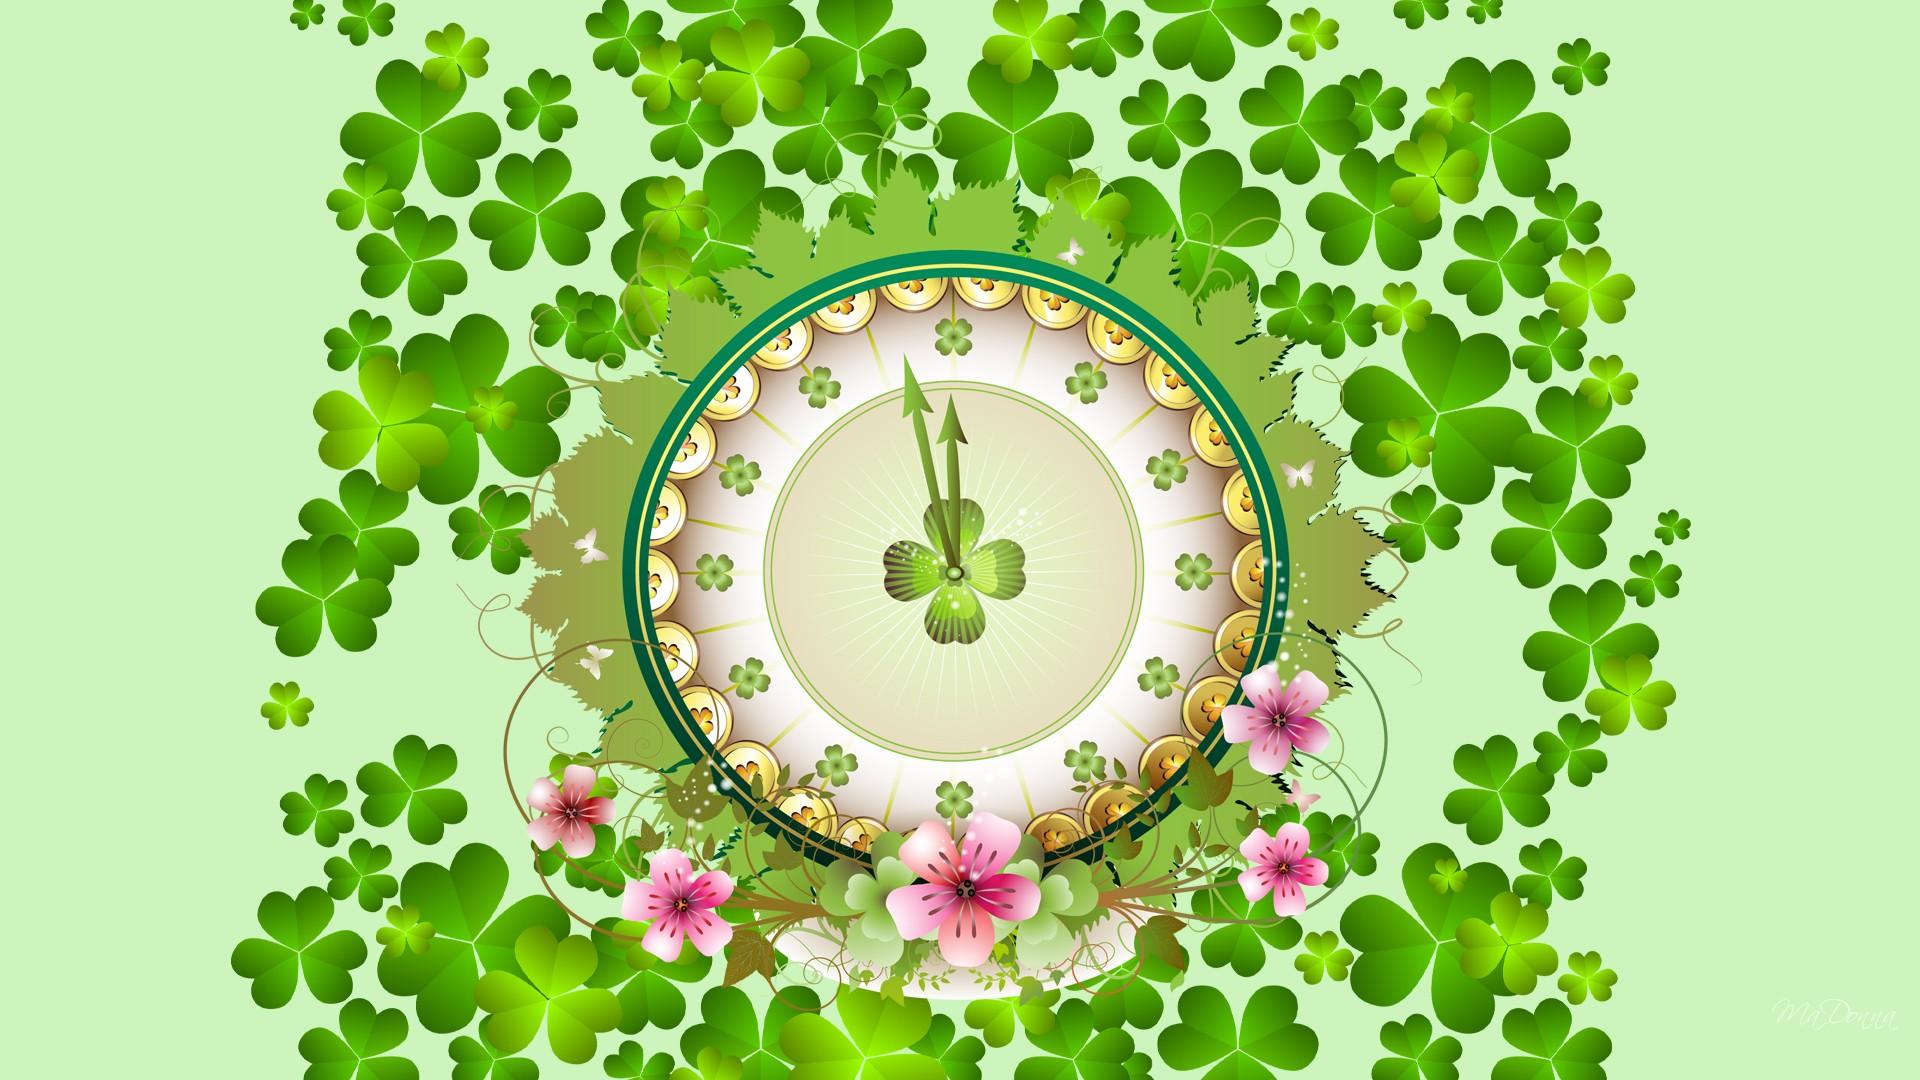 St Patrick's Day Backgrounds Wallpapers HD Images